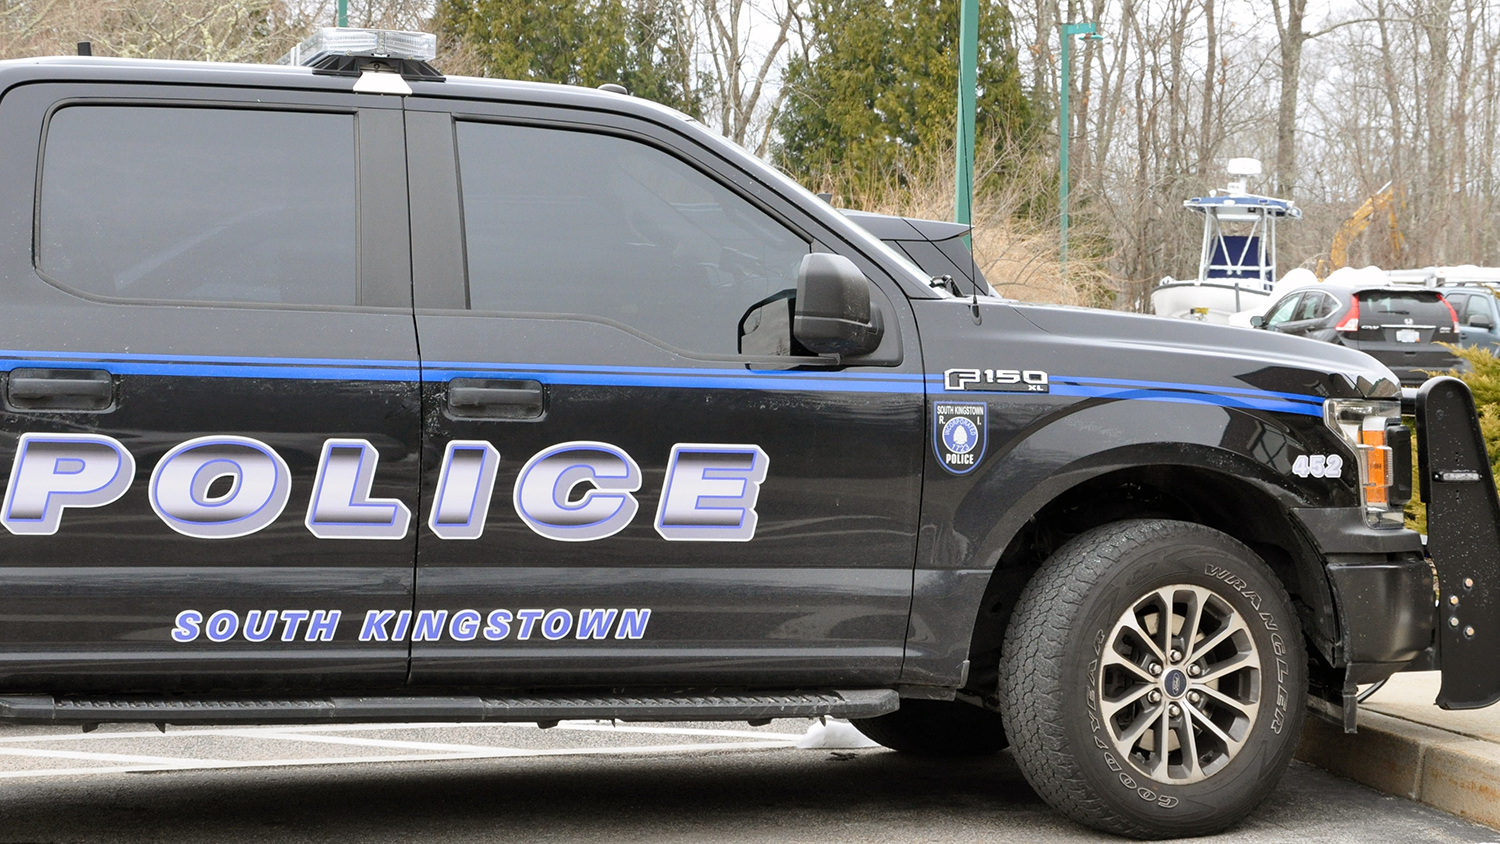 A police vehicle is pictured at the South Kingstown Public Safety Complex.